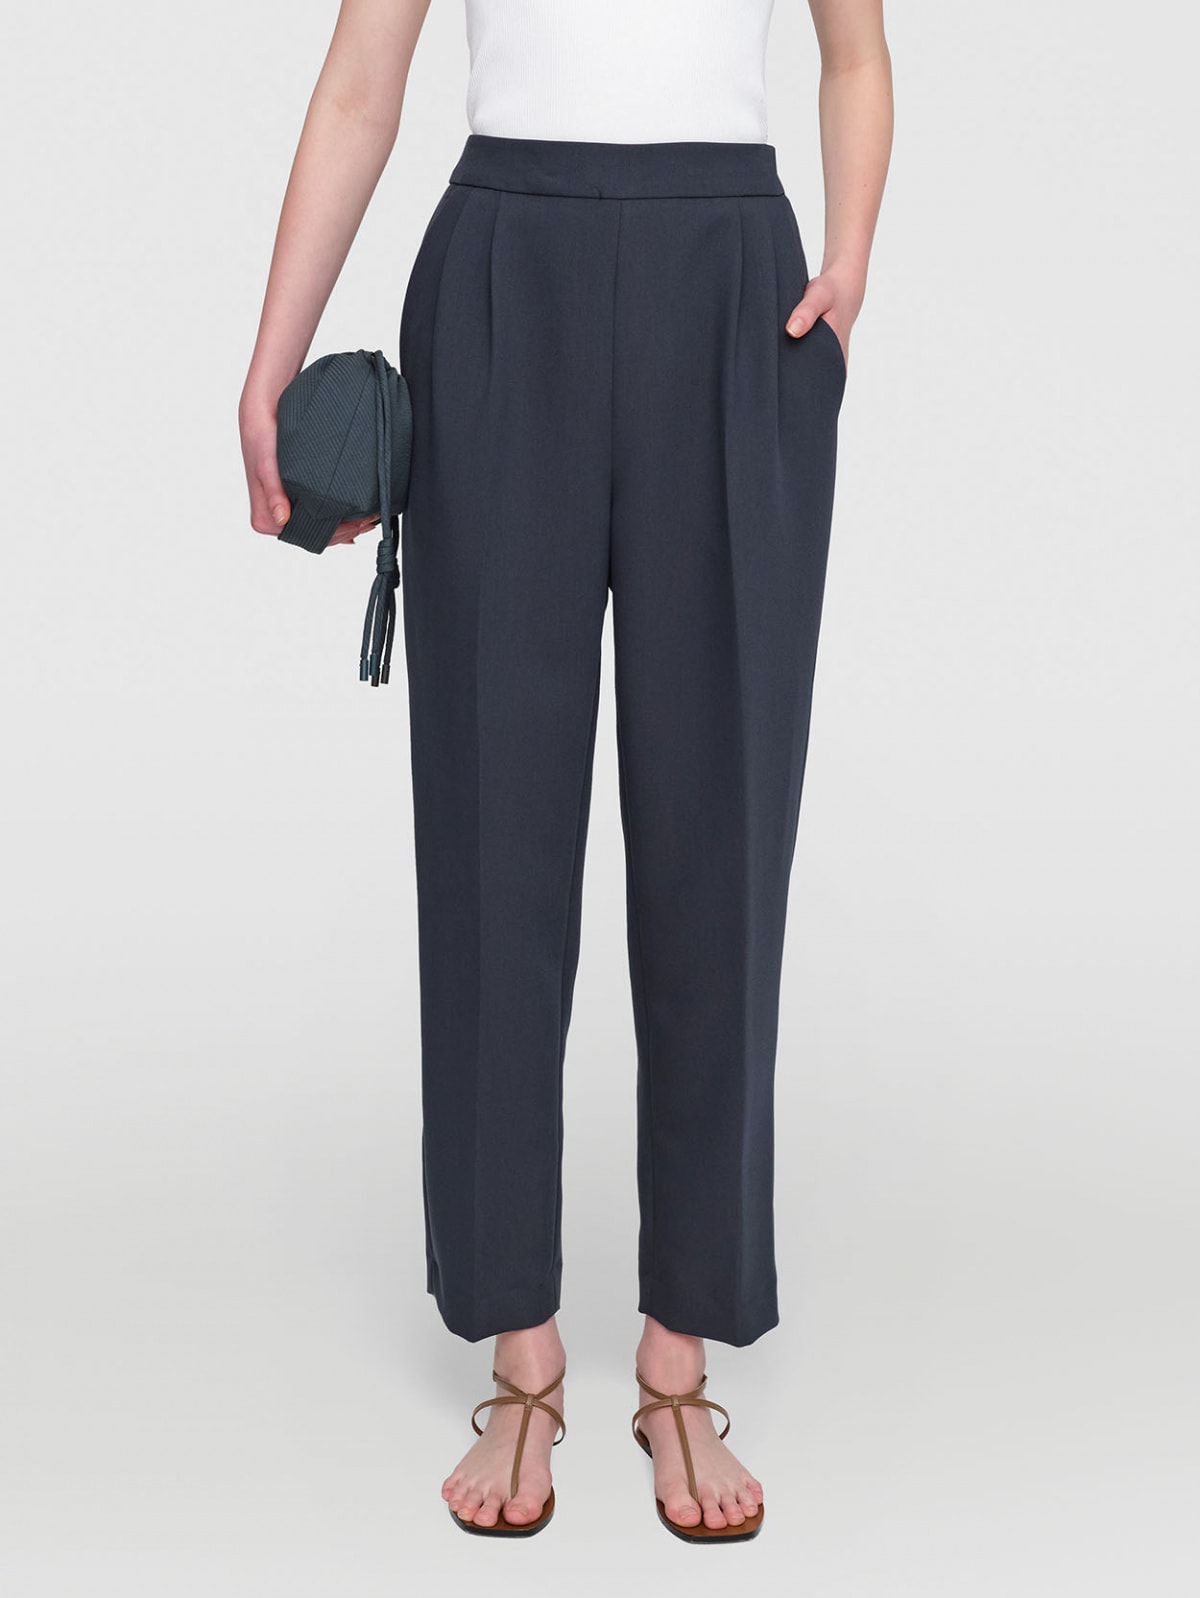 Summer Suiting  Pippa  Crop Pants  1